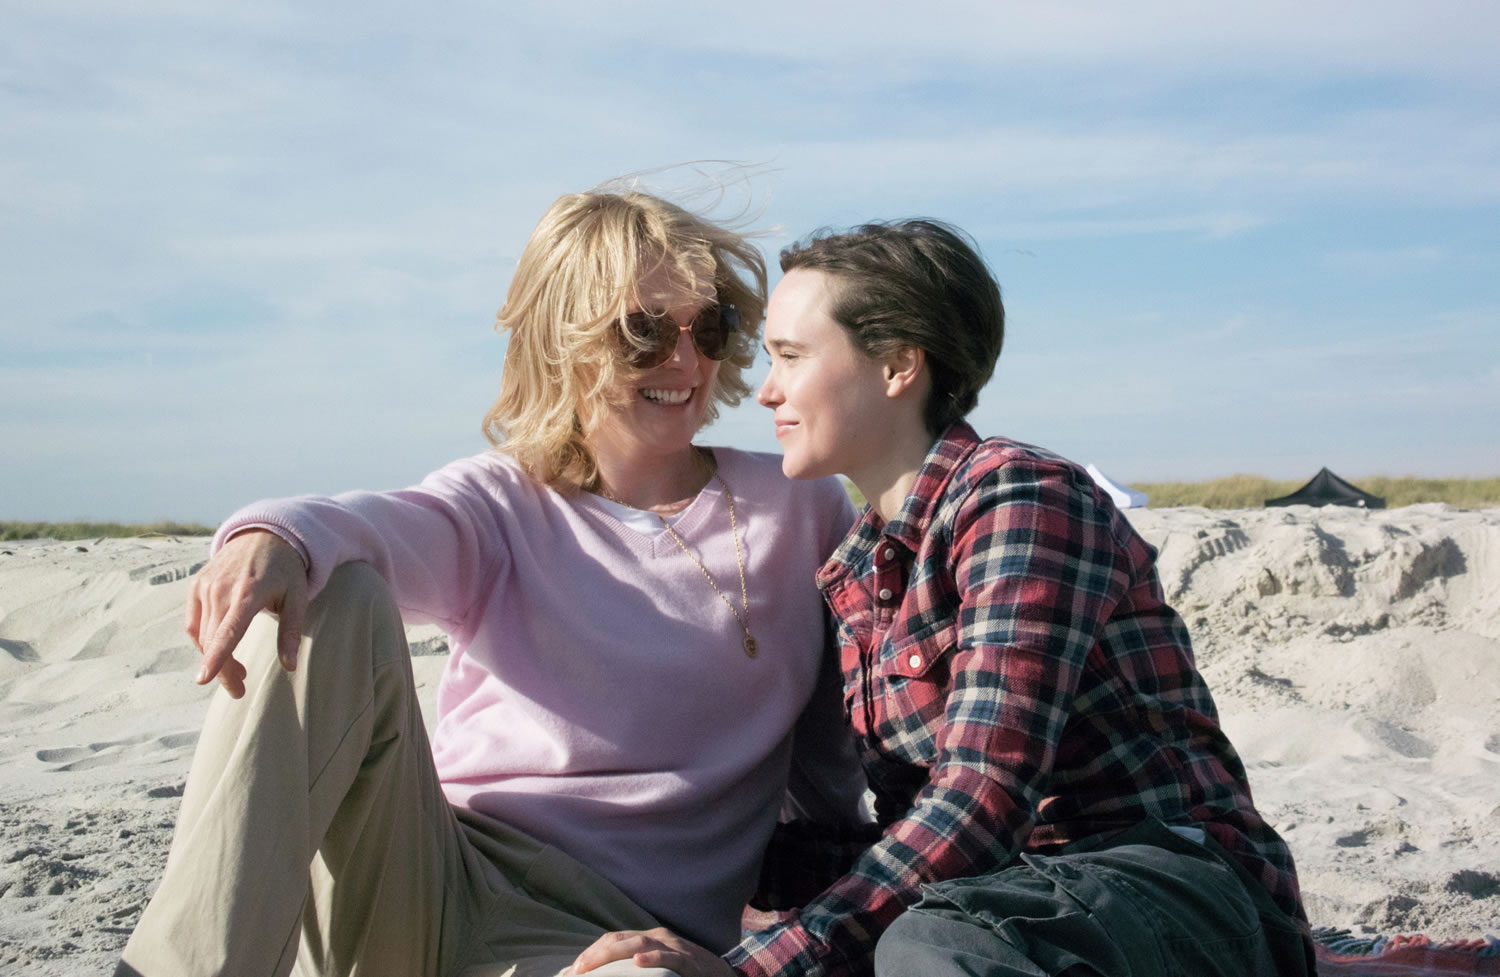 Julianne Moore, left, and Ellen Page star in the film "Freeheld," directed by Peter Sollett. As the largest launching pad to the fall movie season, the Toronto Film Festival, which began Thursday, is a regular home to the biopics and other true-life tales that usually populate awards season.